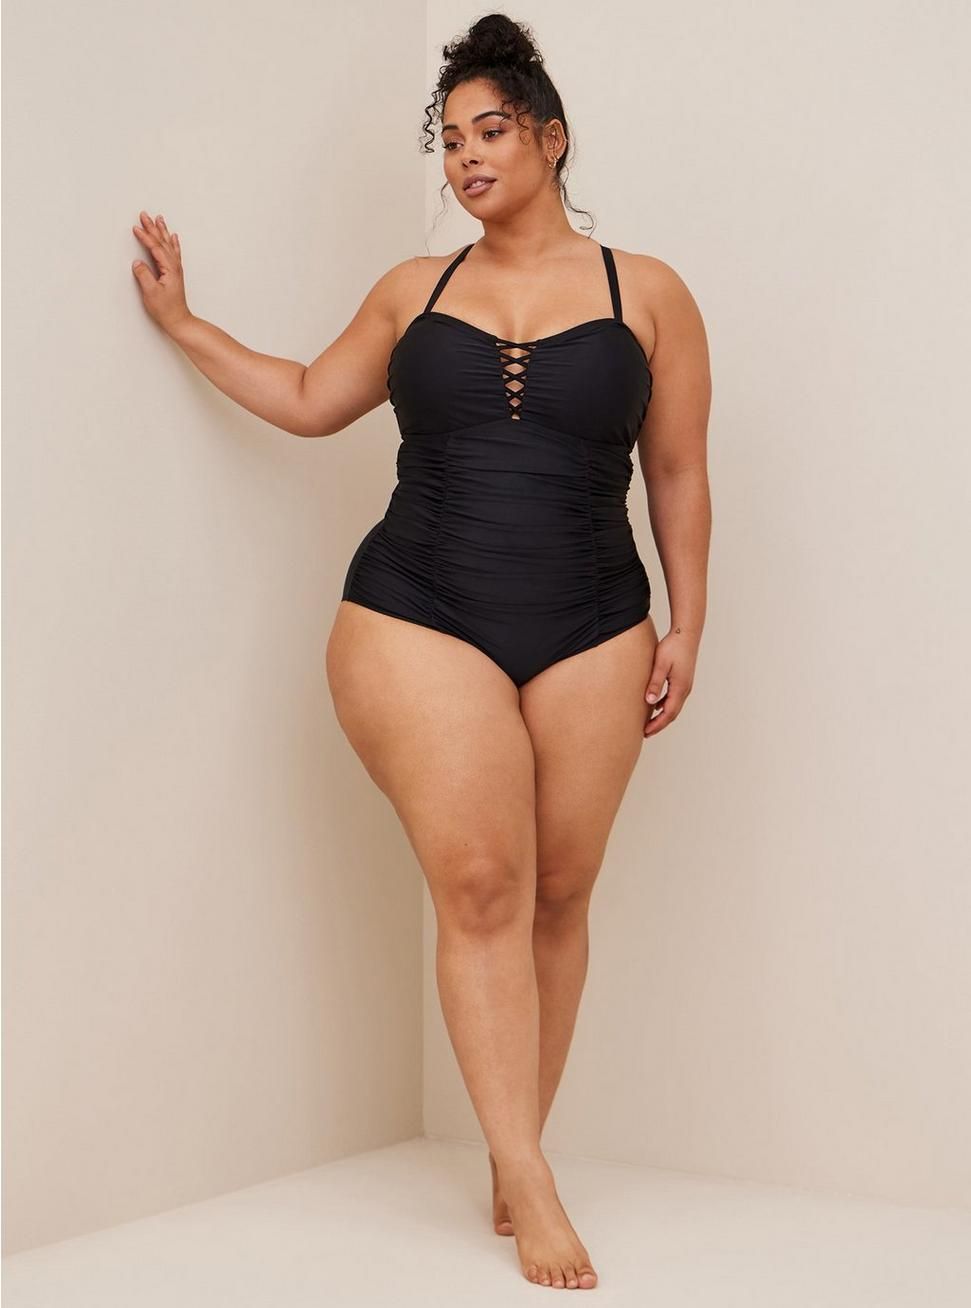 Stylish Plus-Size Swimsuits for a Perfect Summer Look